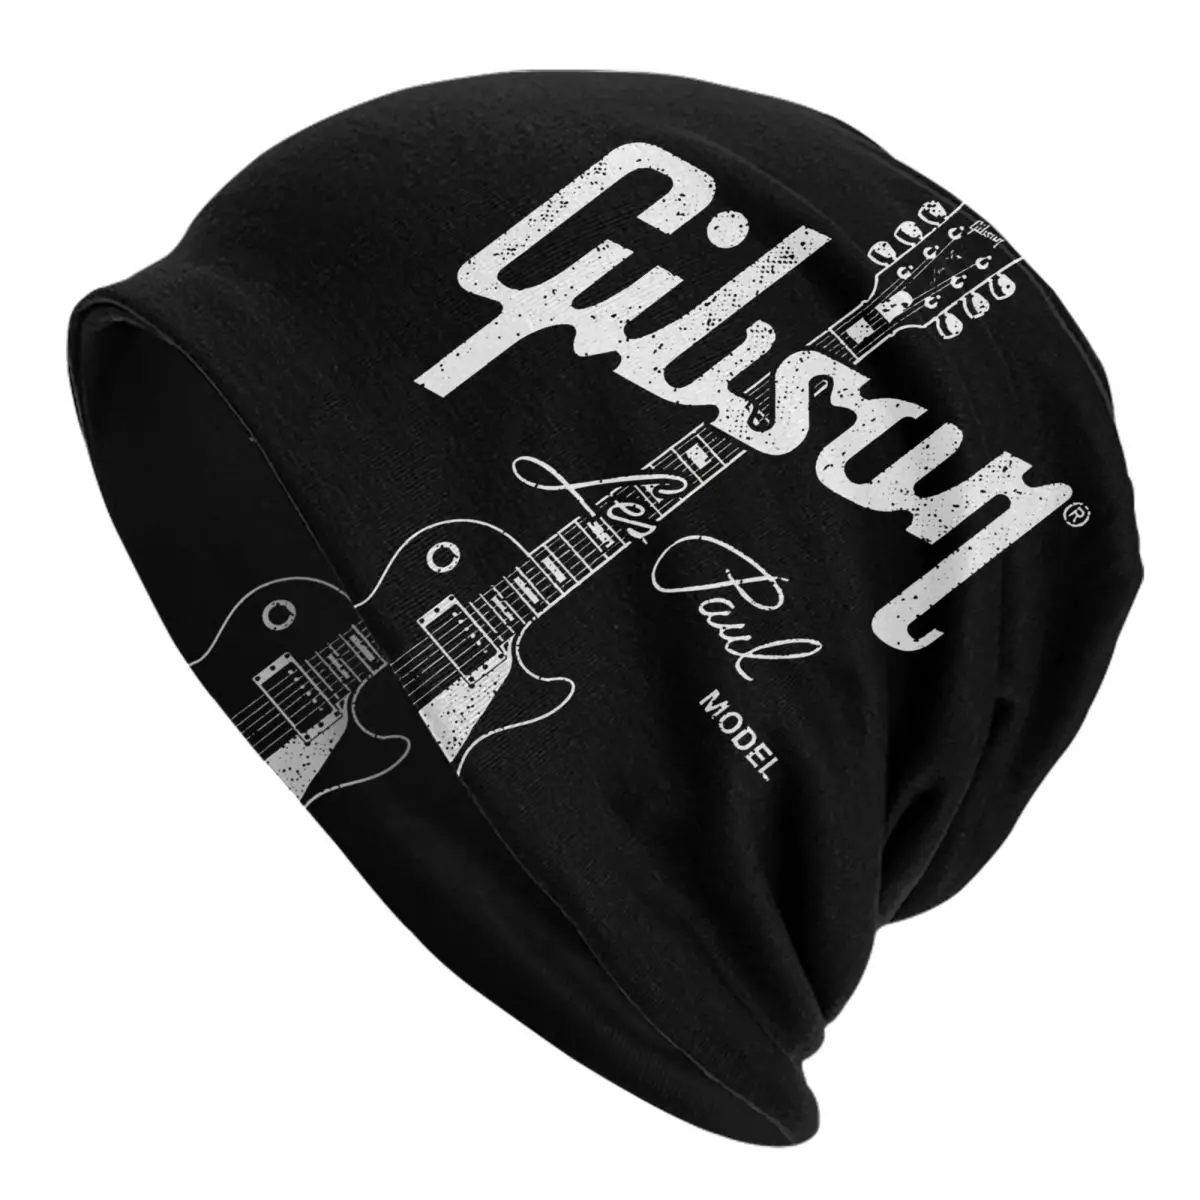 Les Paul Guitar Adult Men's Women's Knit Hat Keep warm winter Funny knitted hat